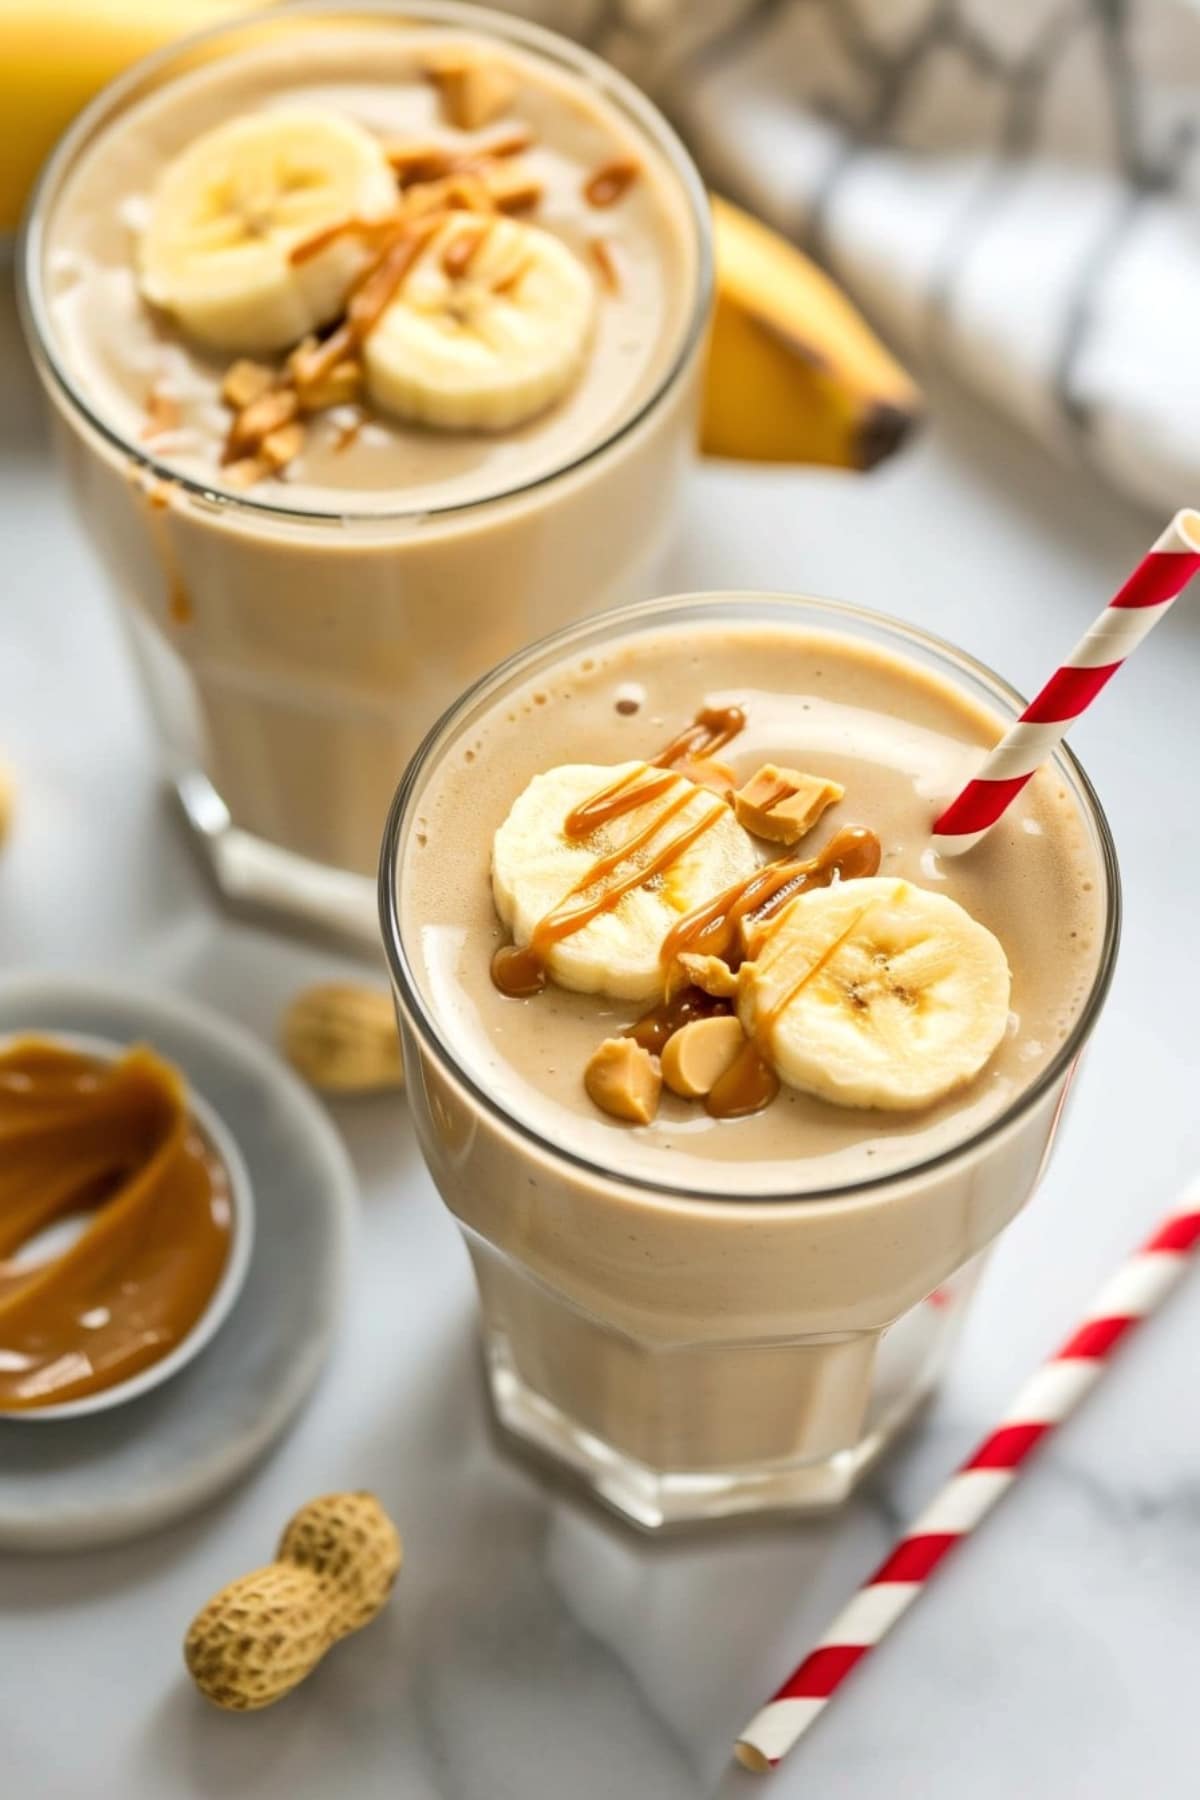 Two glasses of smoothie with peanuts, banana slices, and peanut butter 